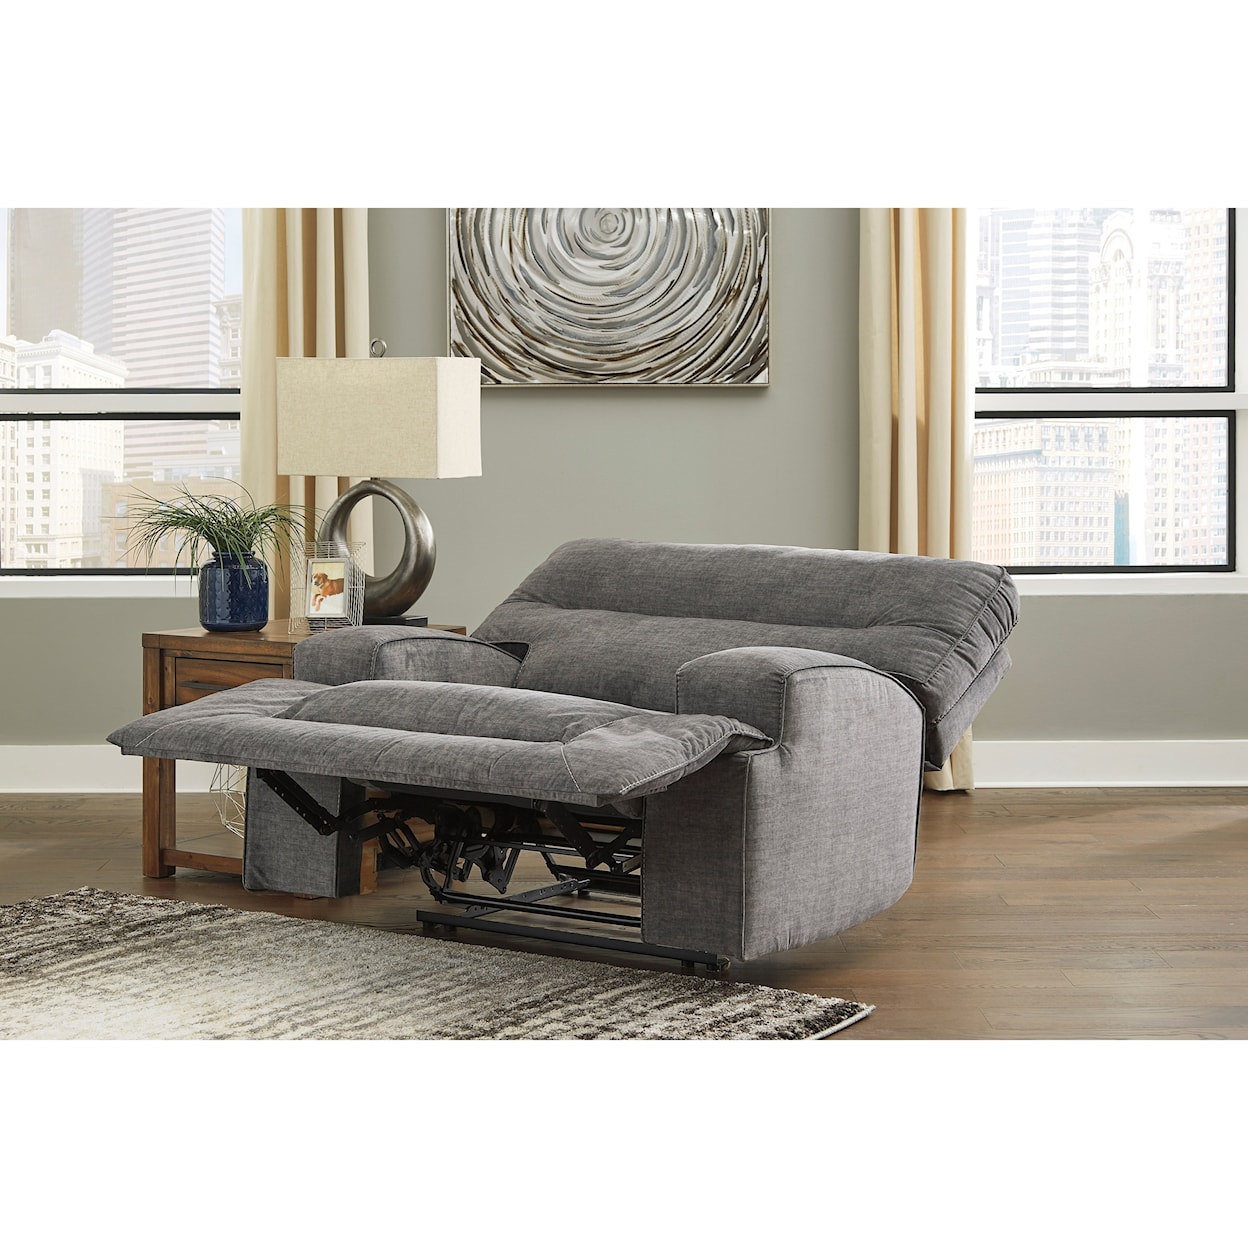 Benchcraft Coombs Wide Seat Recliner